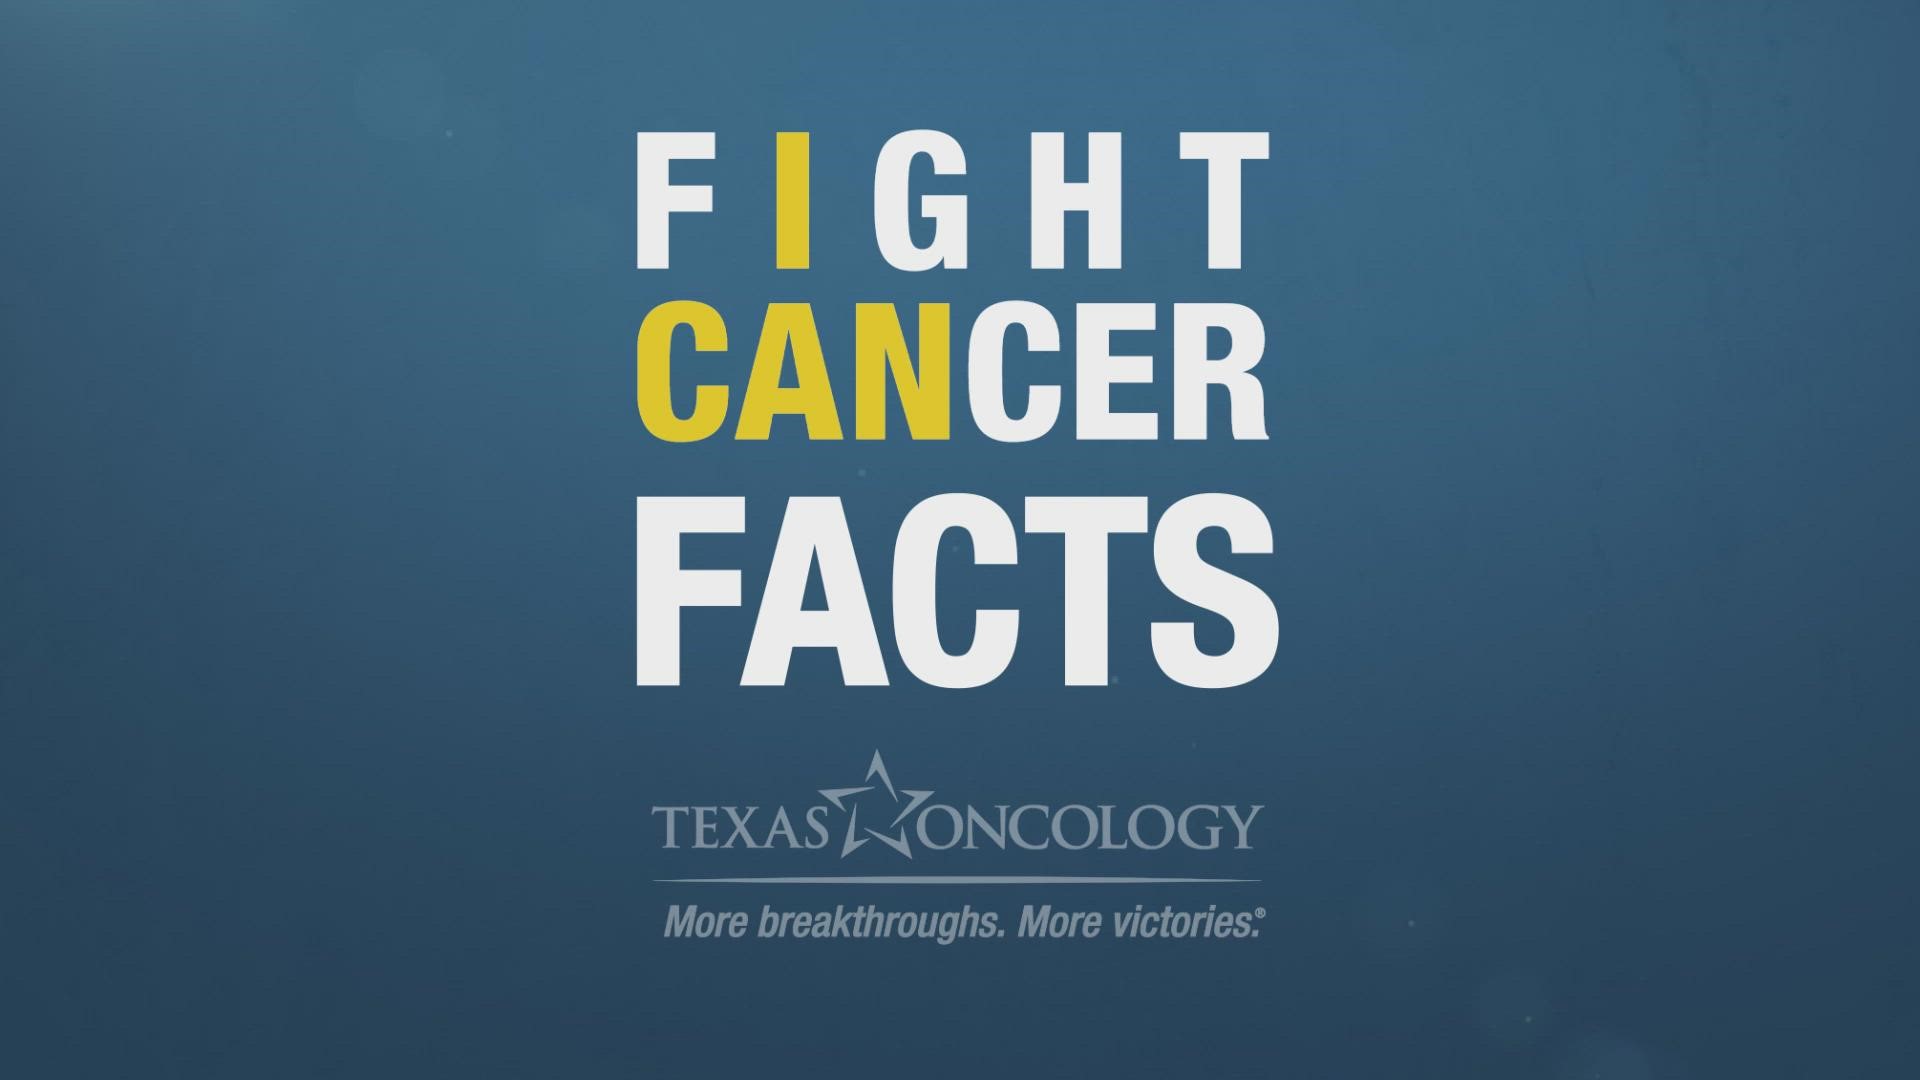 Local Texas Oncology doctor shares how research is transforming the way cancer is treated.